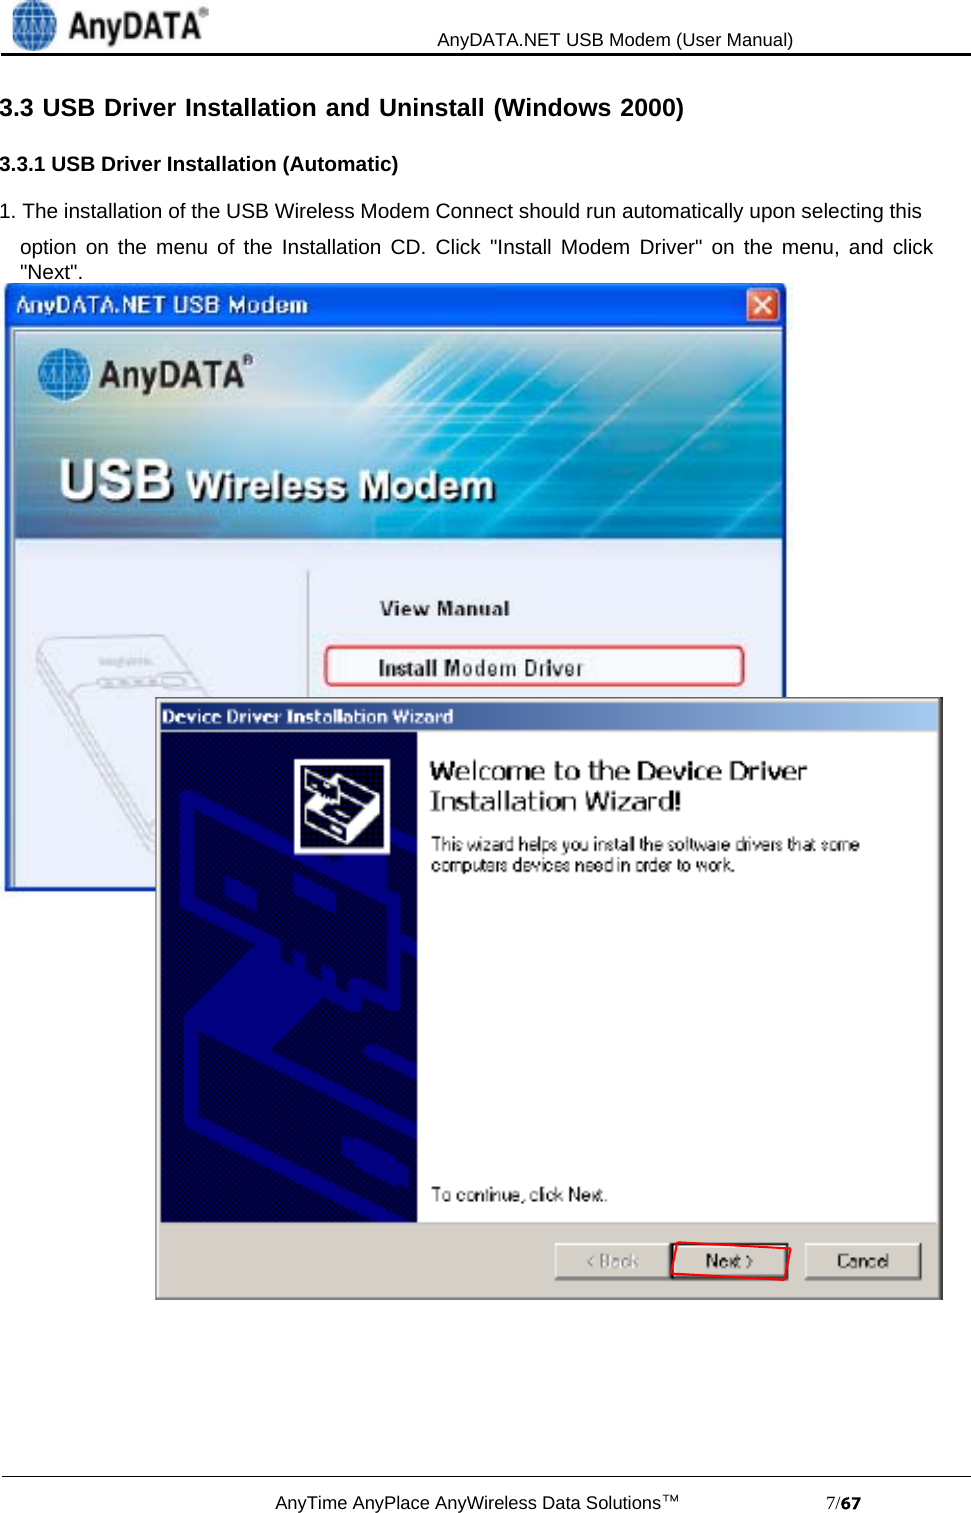                                             AnyDATA.NET USB Modem (User Manual)AnyTime AnyPlace AnyWireless Data Solutions™                            7/3.3 USB Driver Installation and Uninstall (Windows 2000)3.3.1 USB Driver Installation (Automatic)1. The installation of the USB Wireless Modem Connect should run automatically upon selecting thisoption on the menu of the Installation CD. Click &quot;Install Modem Driver&quot; on the menu, and click&quot;Next&quot;.